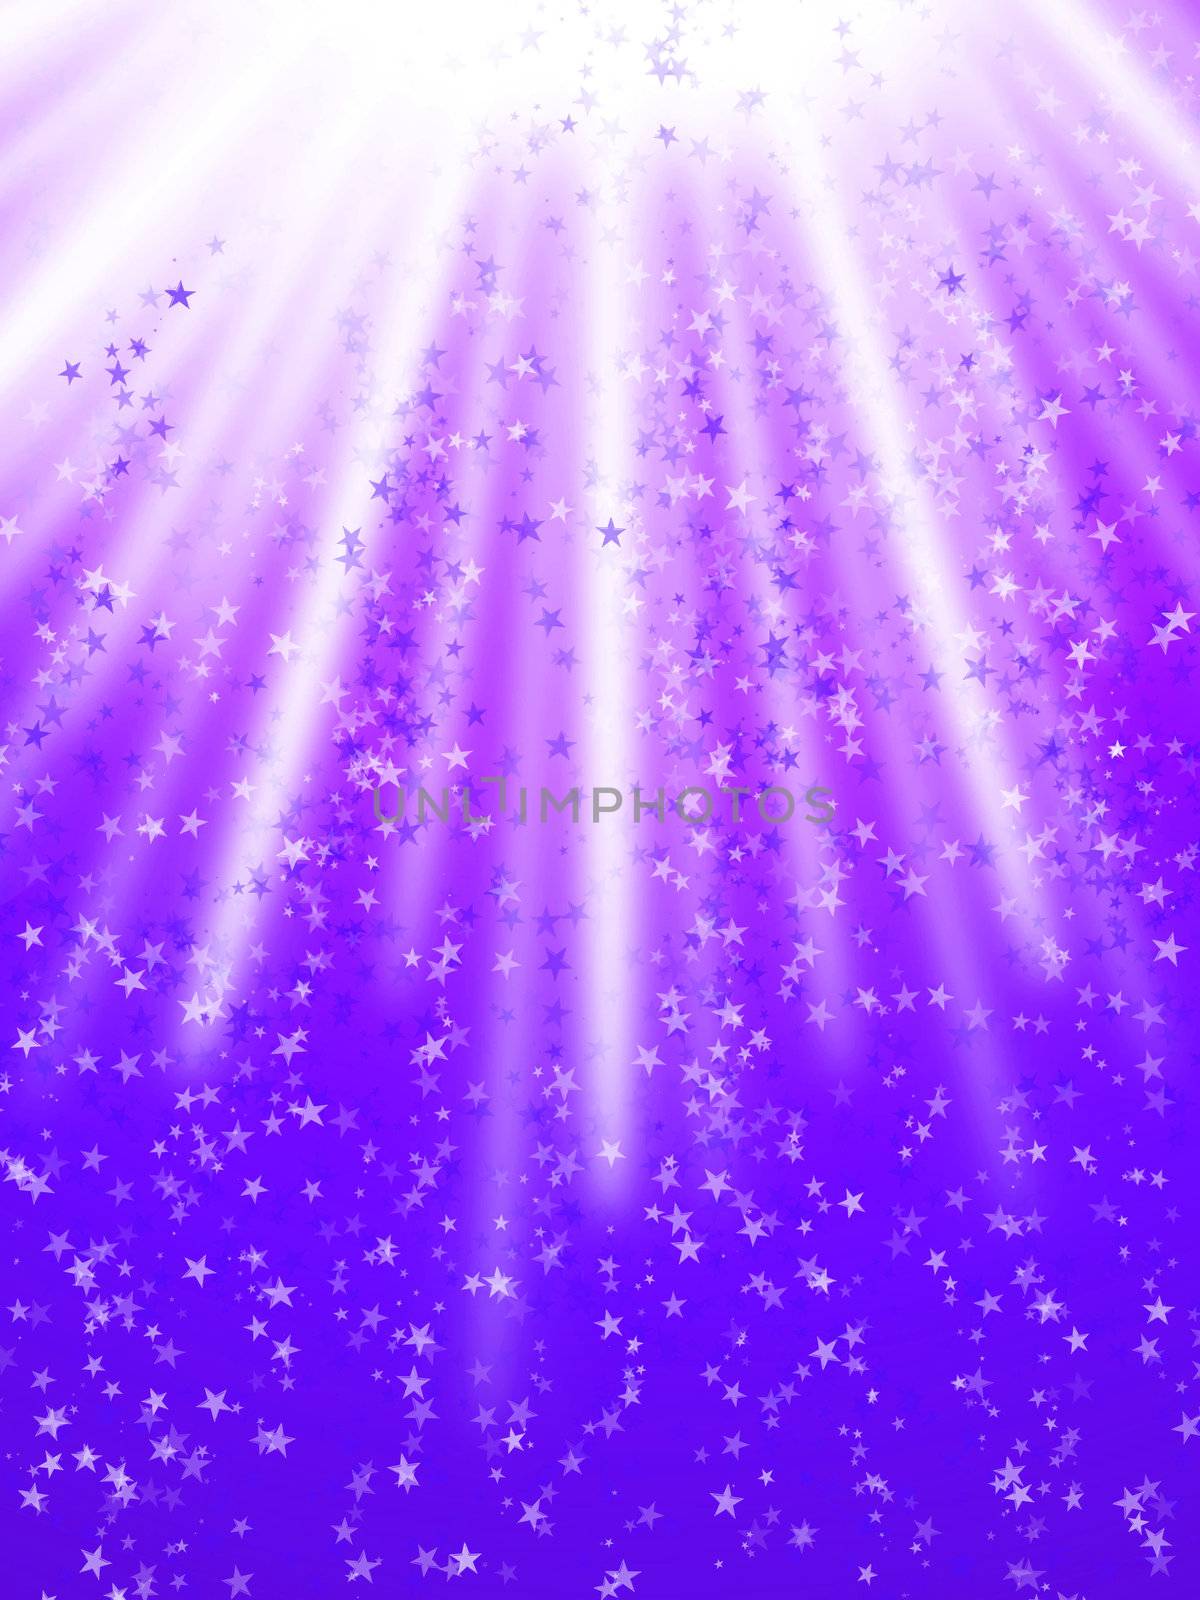 Colour beams with stars on a violet background